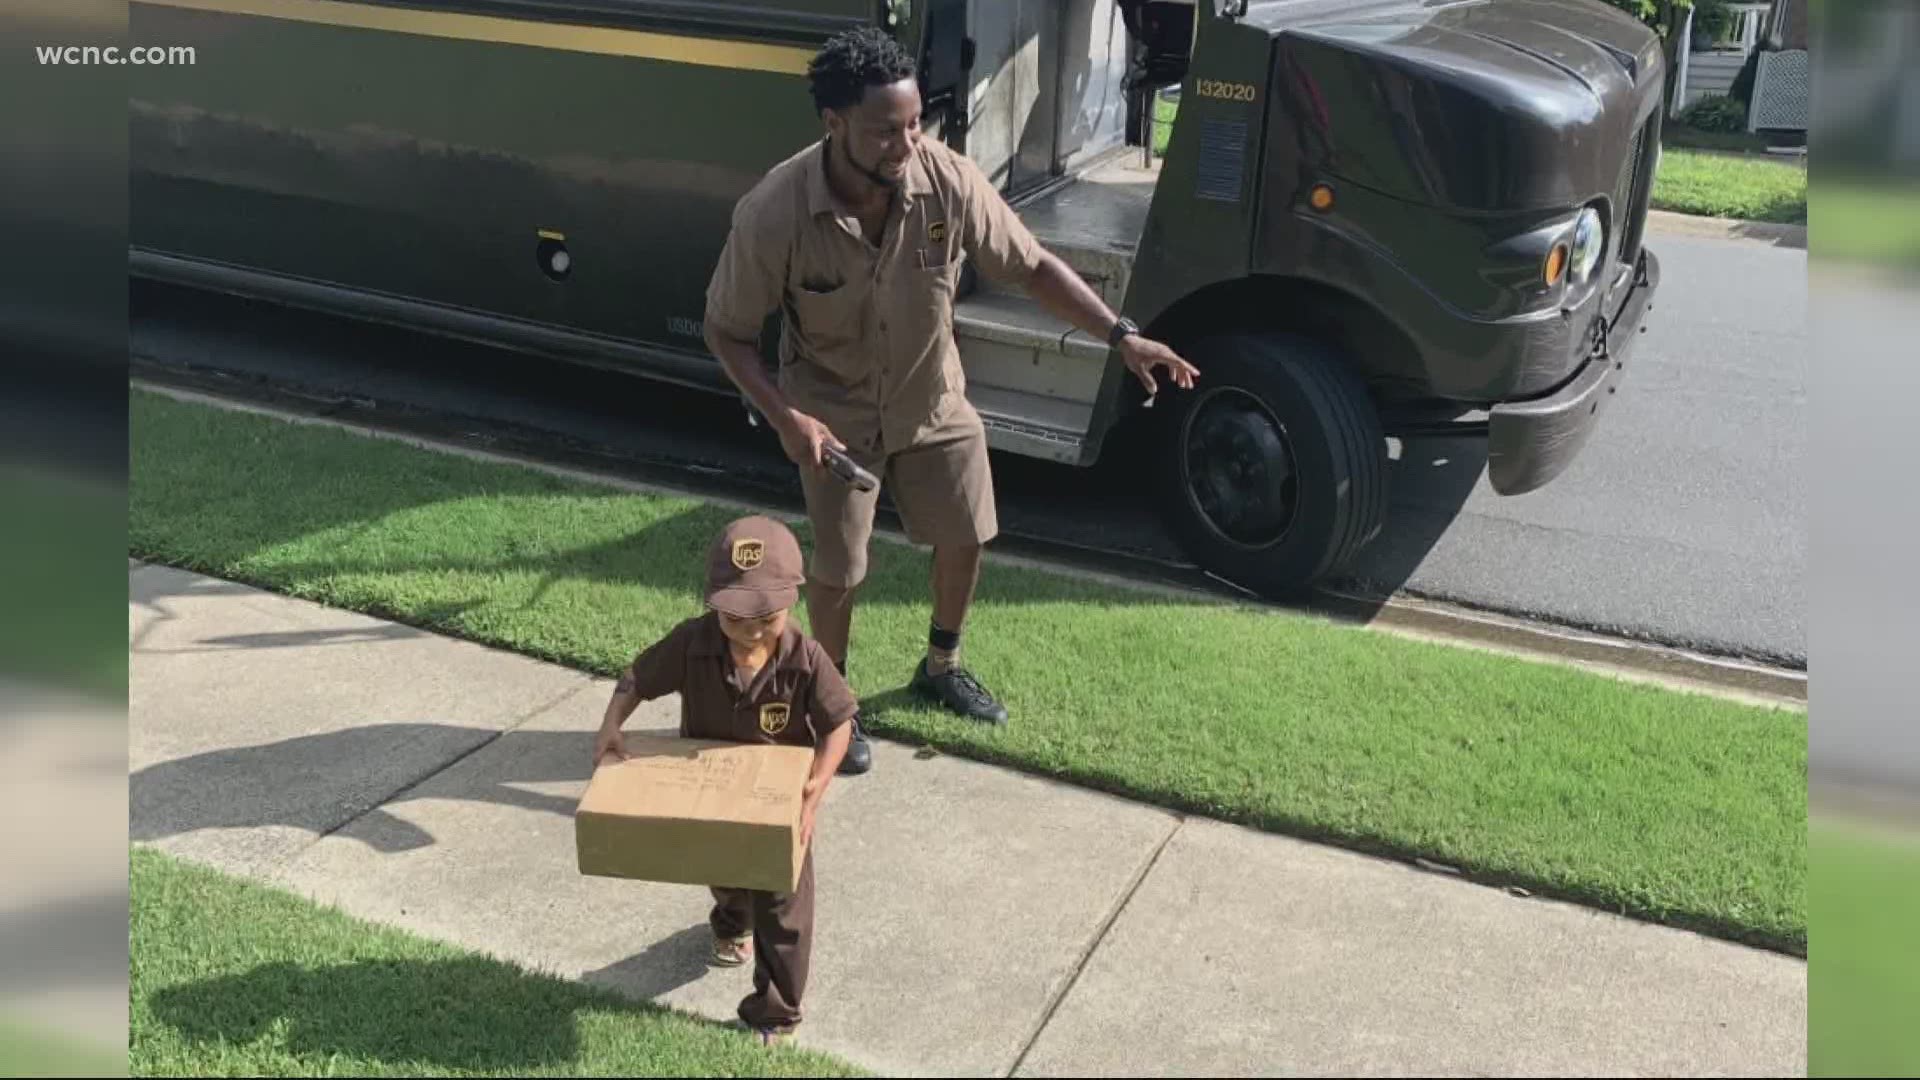 The Charlotte boy is now inspired to become a delivery driver when he grows up.